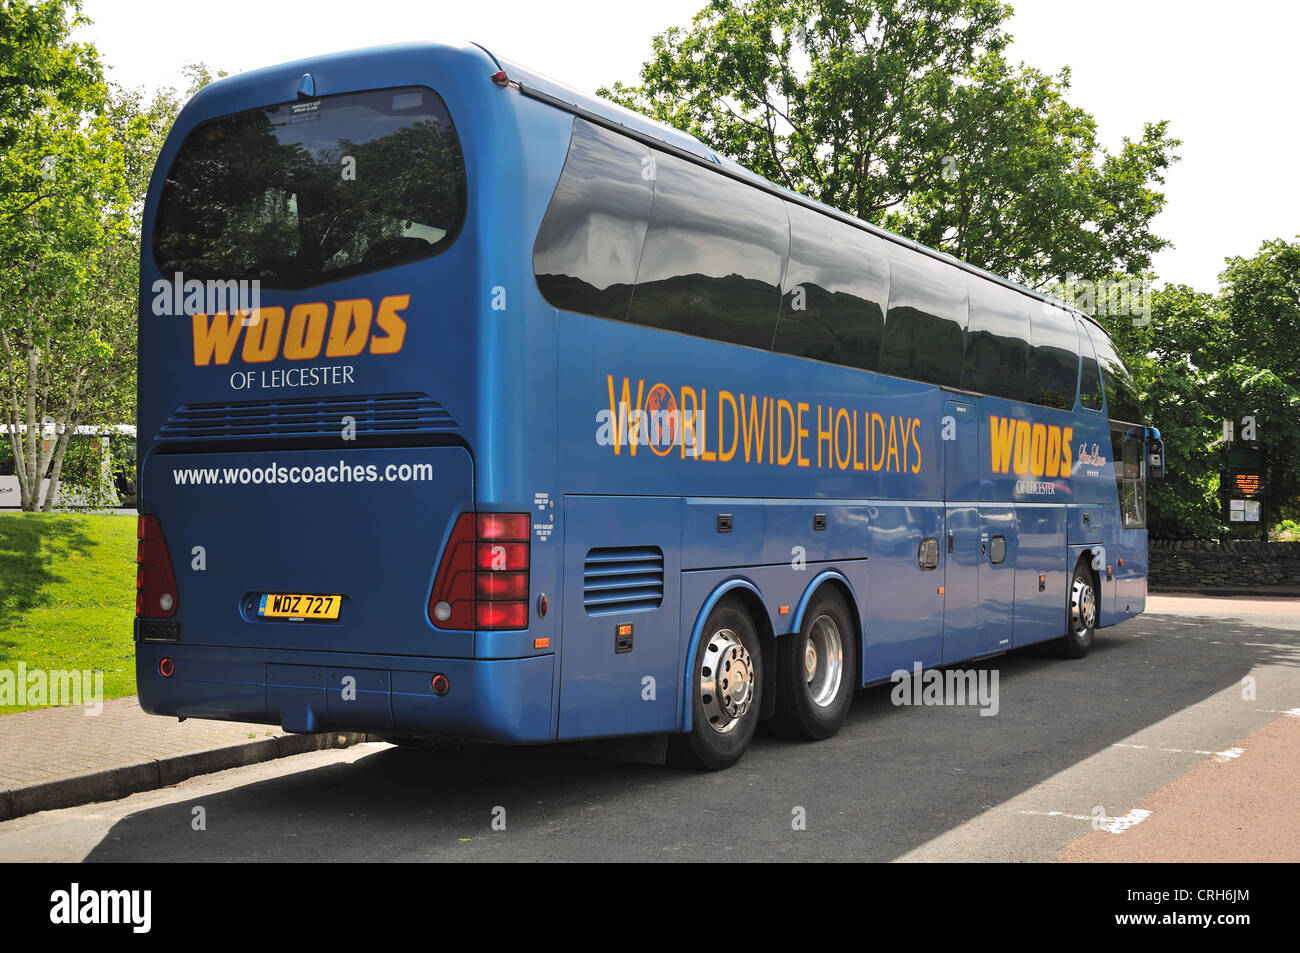 Worldwide Holidays, Woods of Leicester, coach at Luss in Scotland Stock Photo